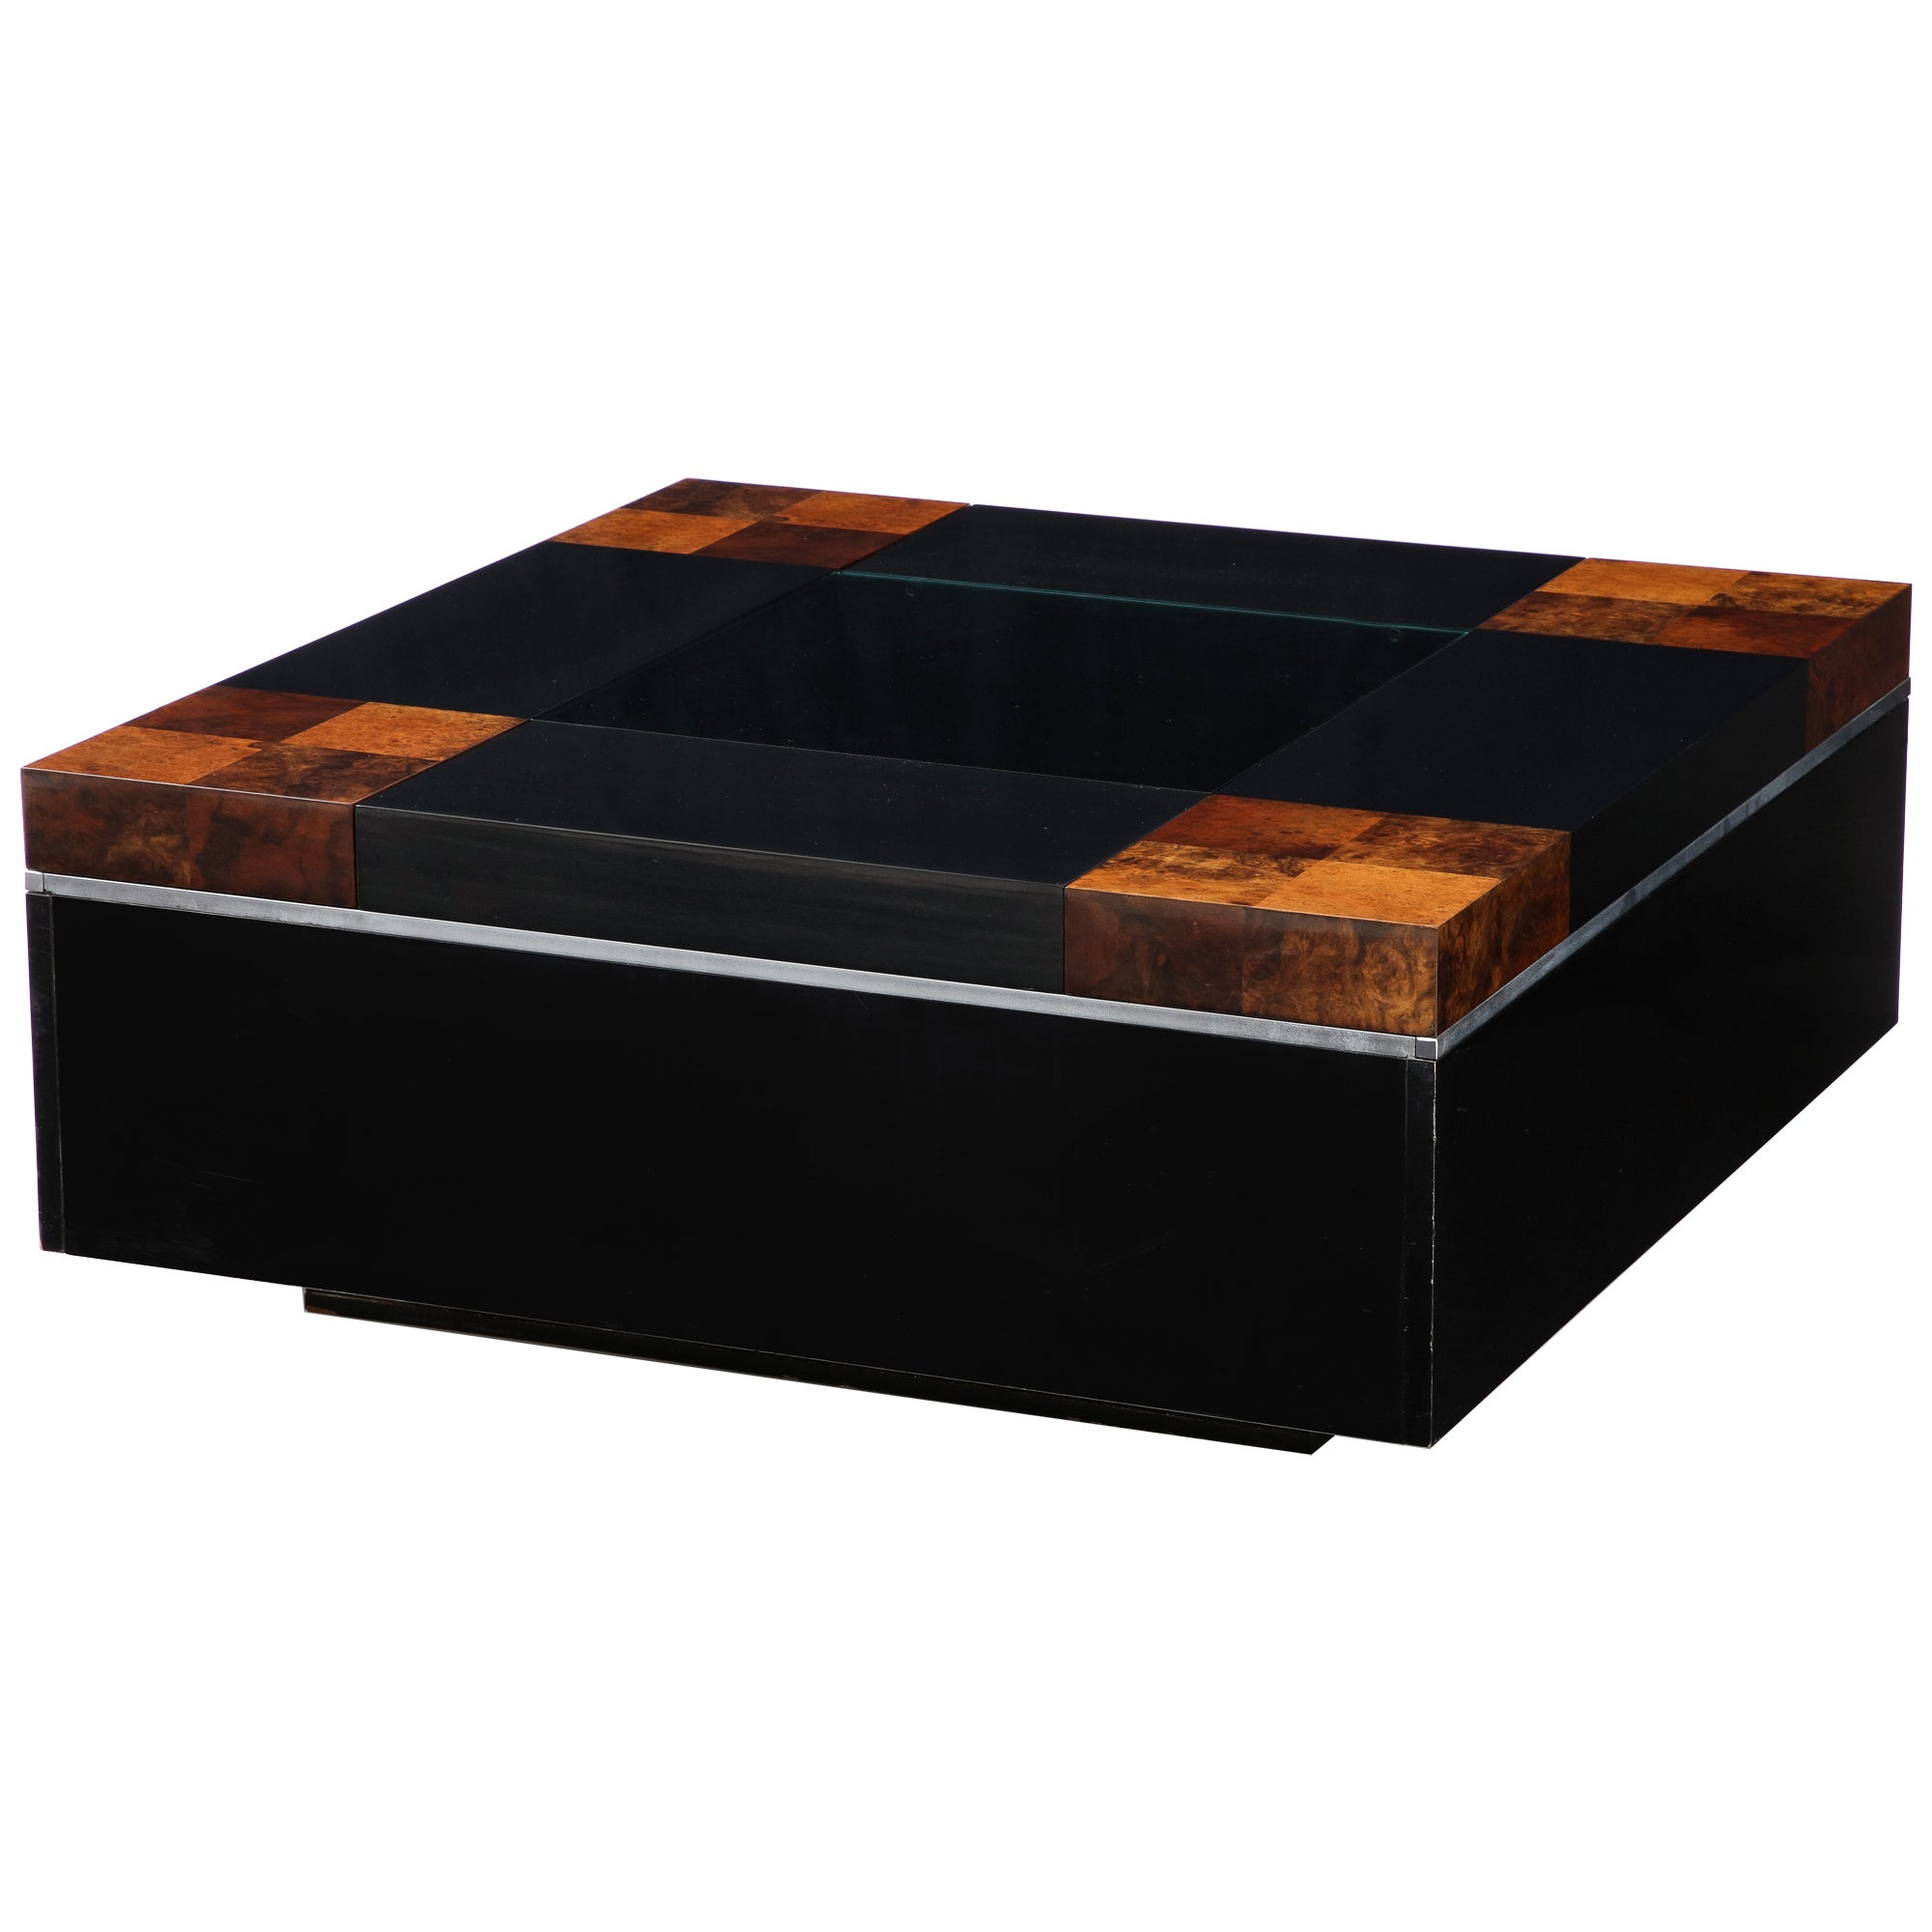 Willy Rizzo Lacquered, Smoked Glass Coffee Table, Italy, for Sabot, circa 1970 For Sale